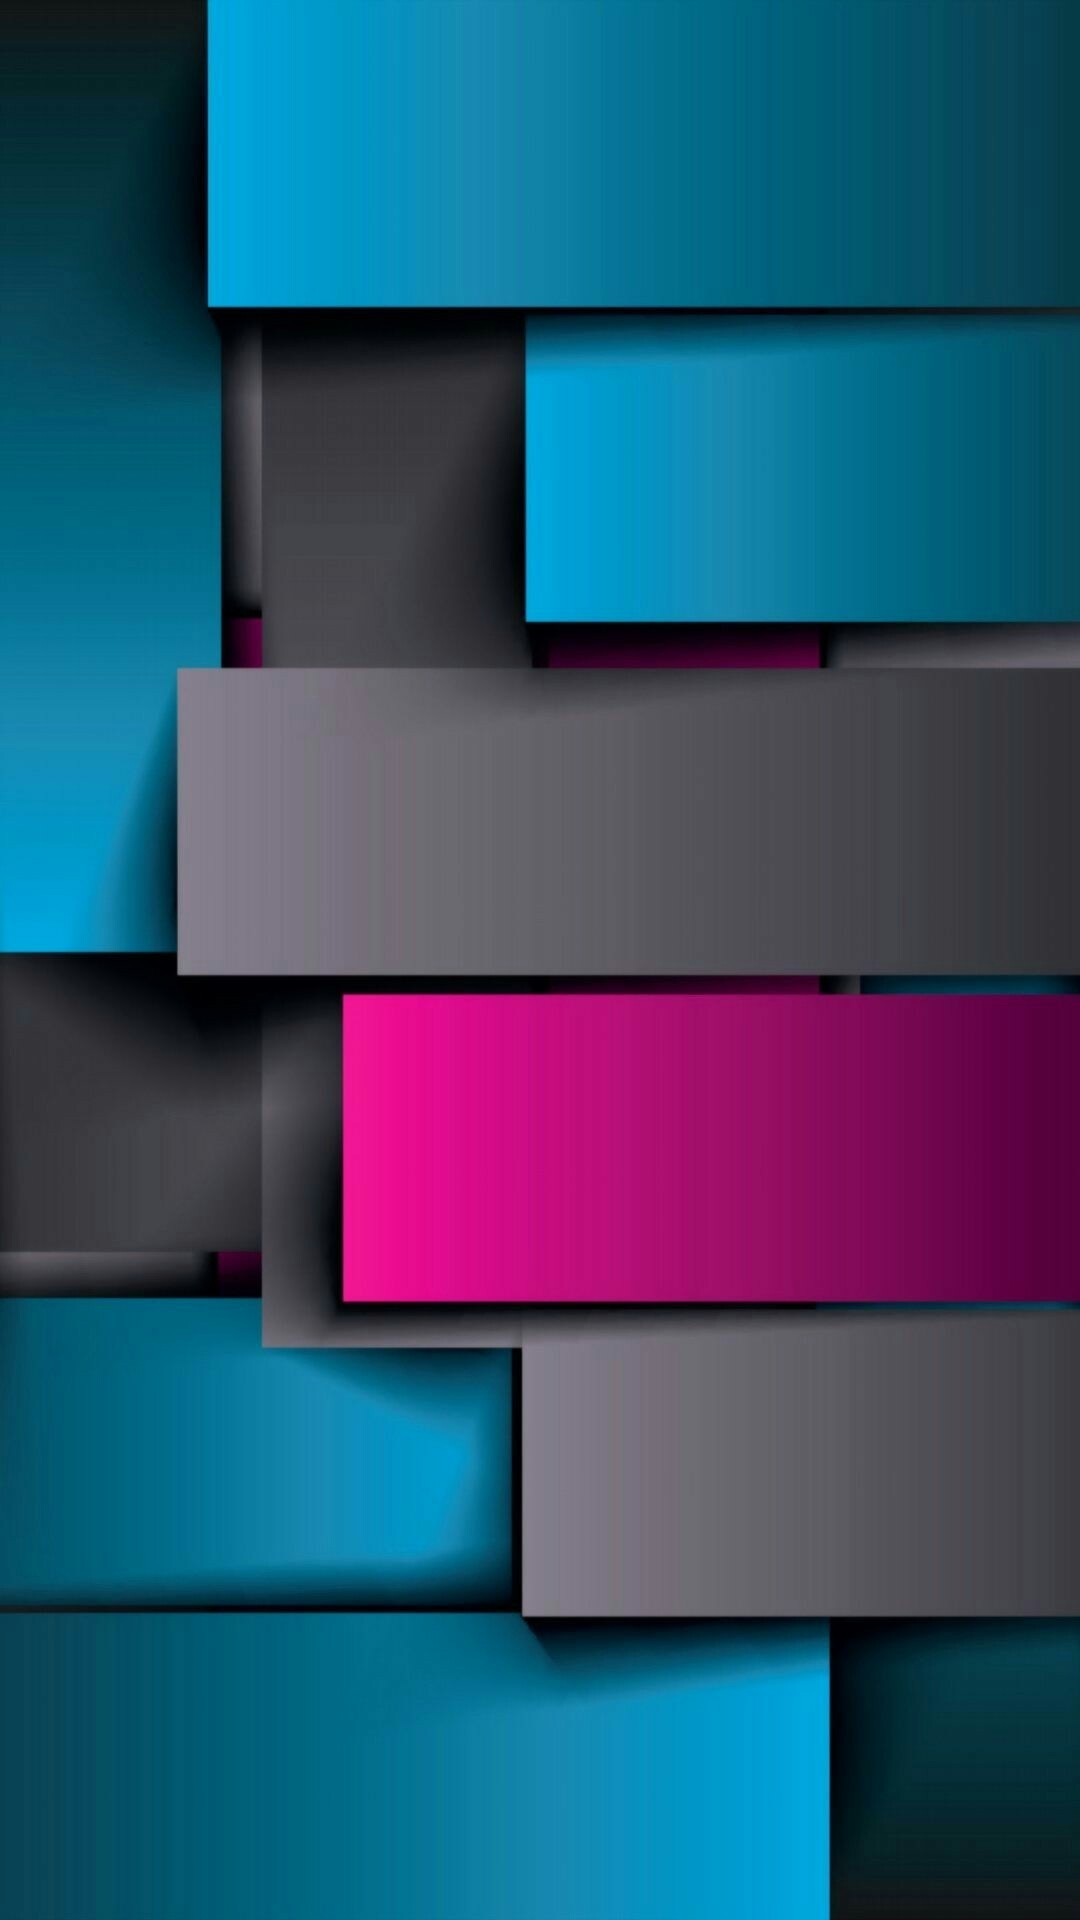 1080x1920 Teal Grey and Pink Geometric Wallpaper